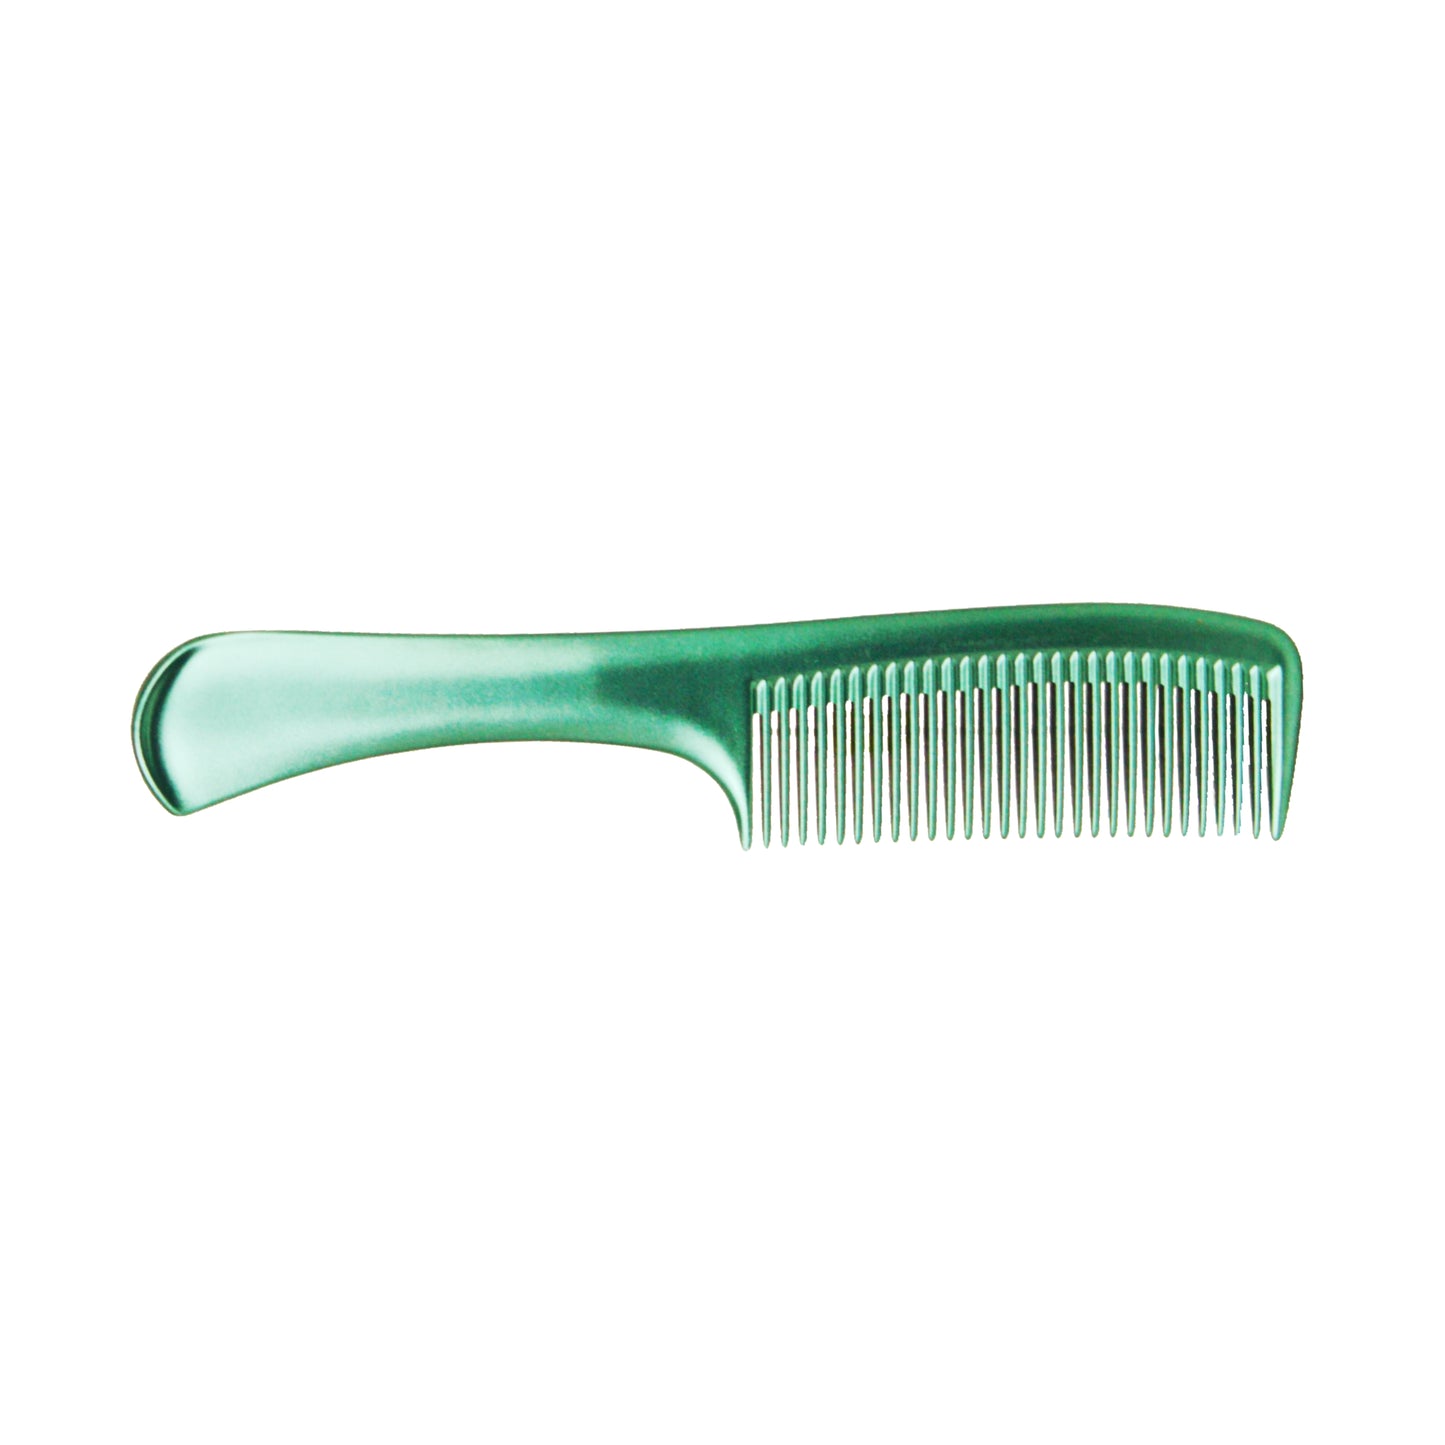 Pegasus MICOLOR 501, 9in Hard Rubber Handle Comb, Handmade, Seamless, Smooth Edges, Anti Static, Heat and Chemically Resistant, Wet Hair, Everyday Grooming Comb | Peines de goma dura - Green